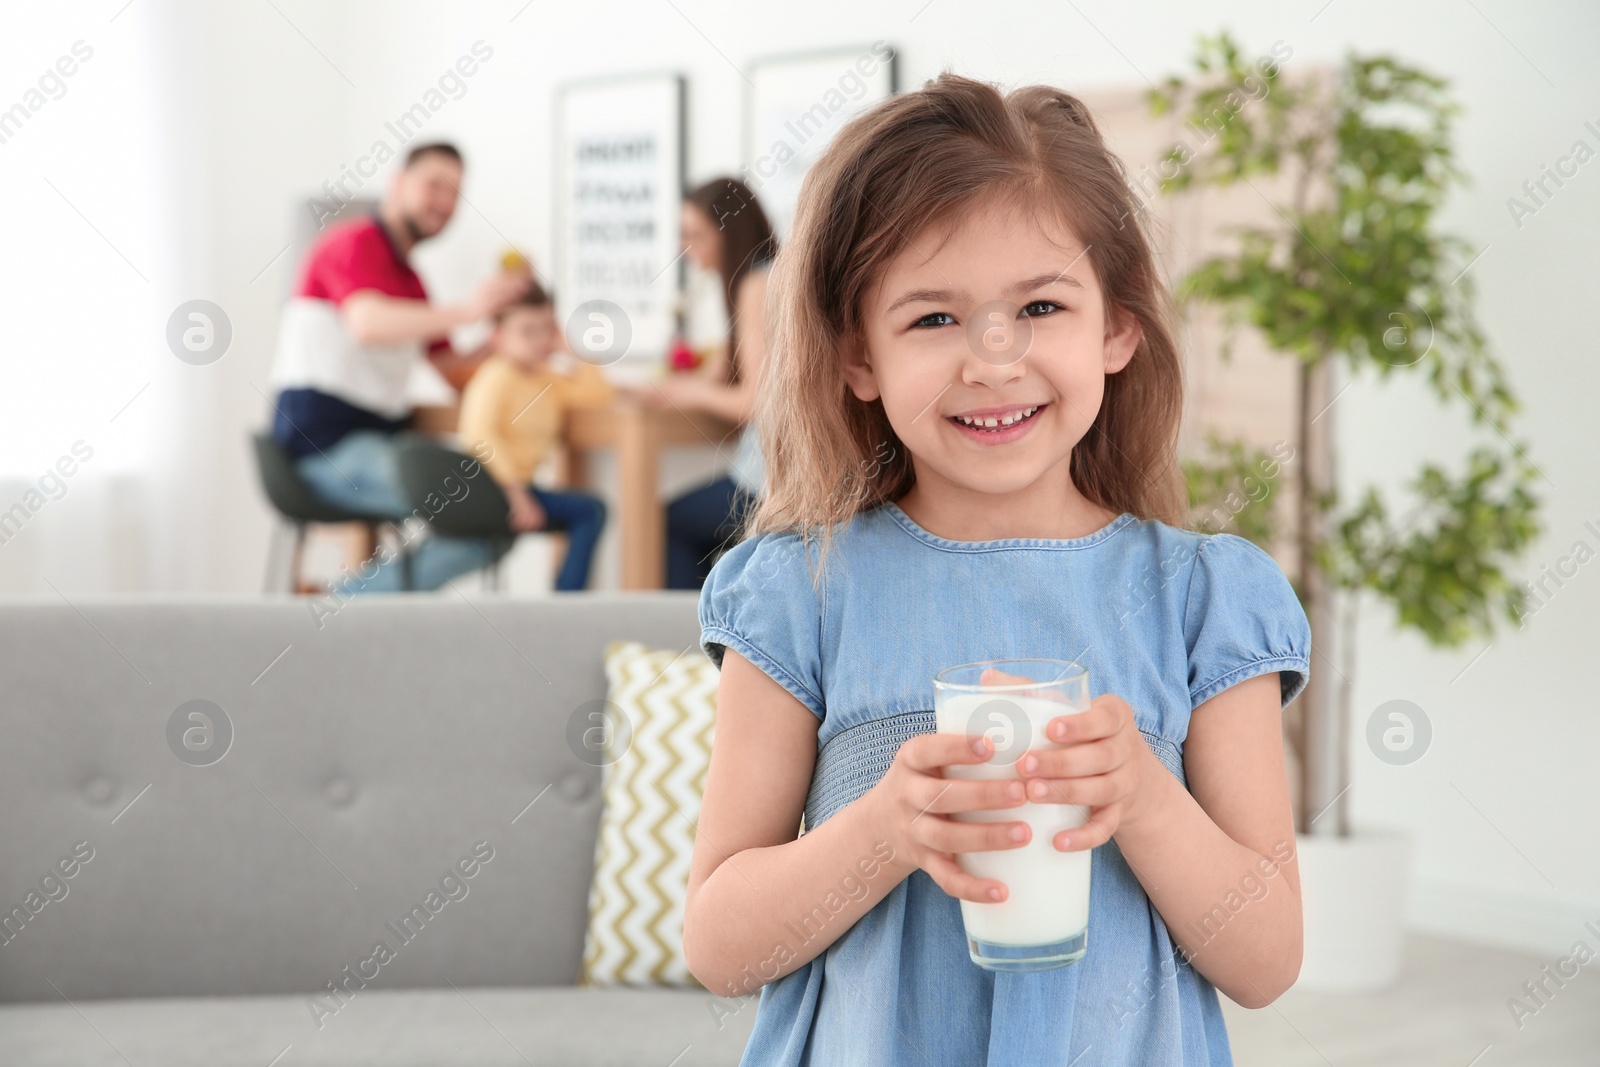 Photo of Cute little girl with glass of milk at home